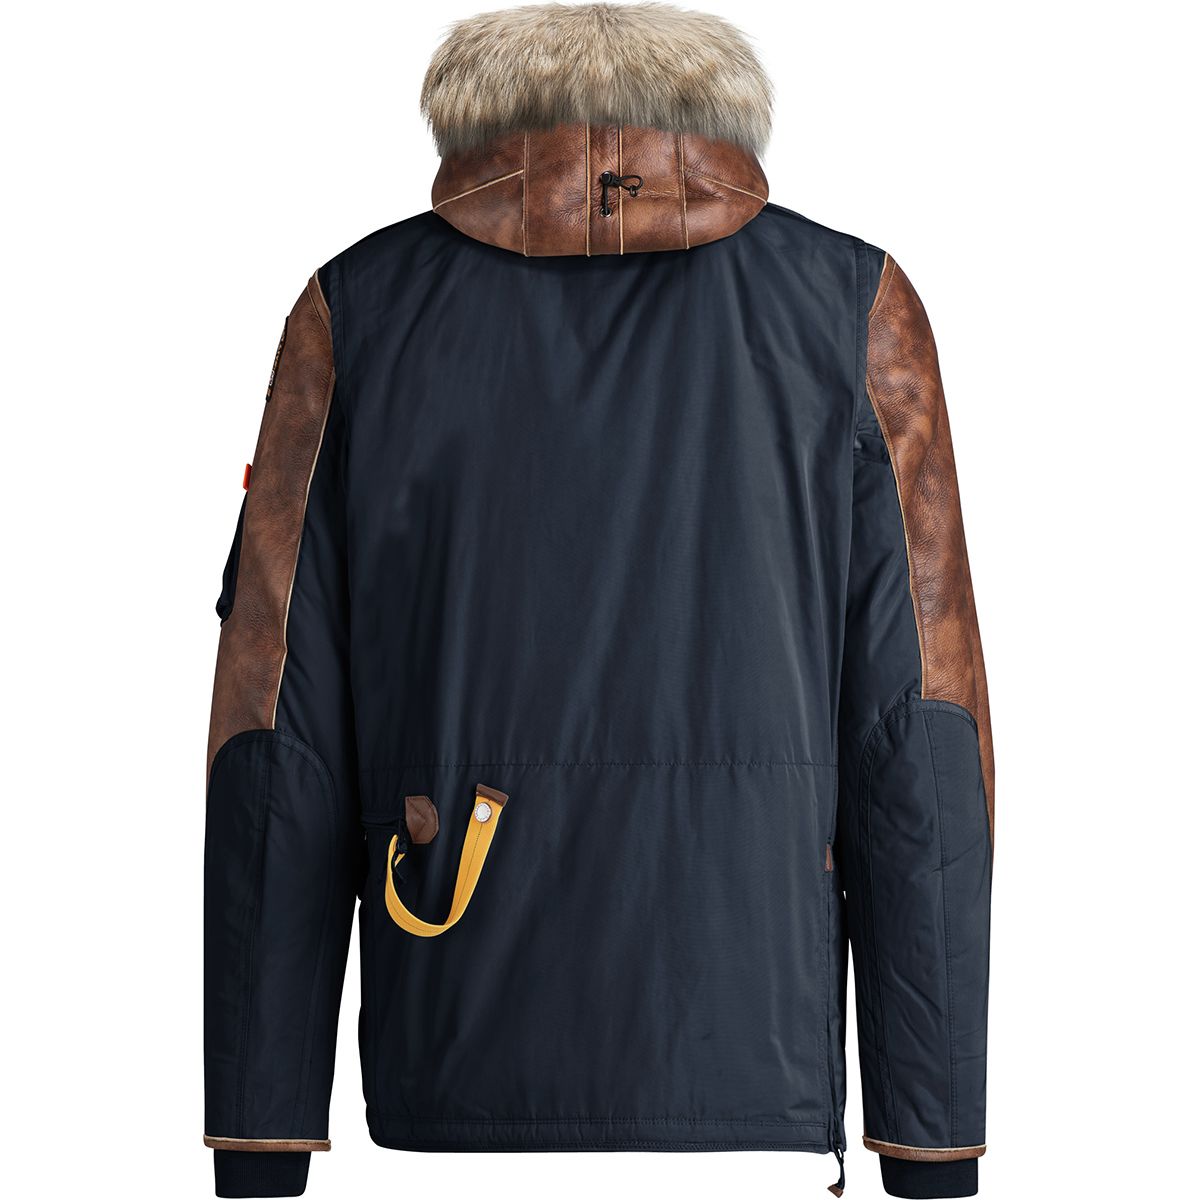 Parajumpers Special Edition Forrest Down Jacket - Men's - Clothing